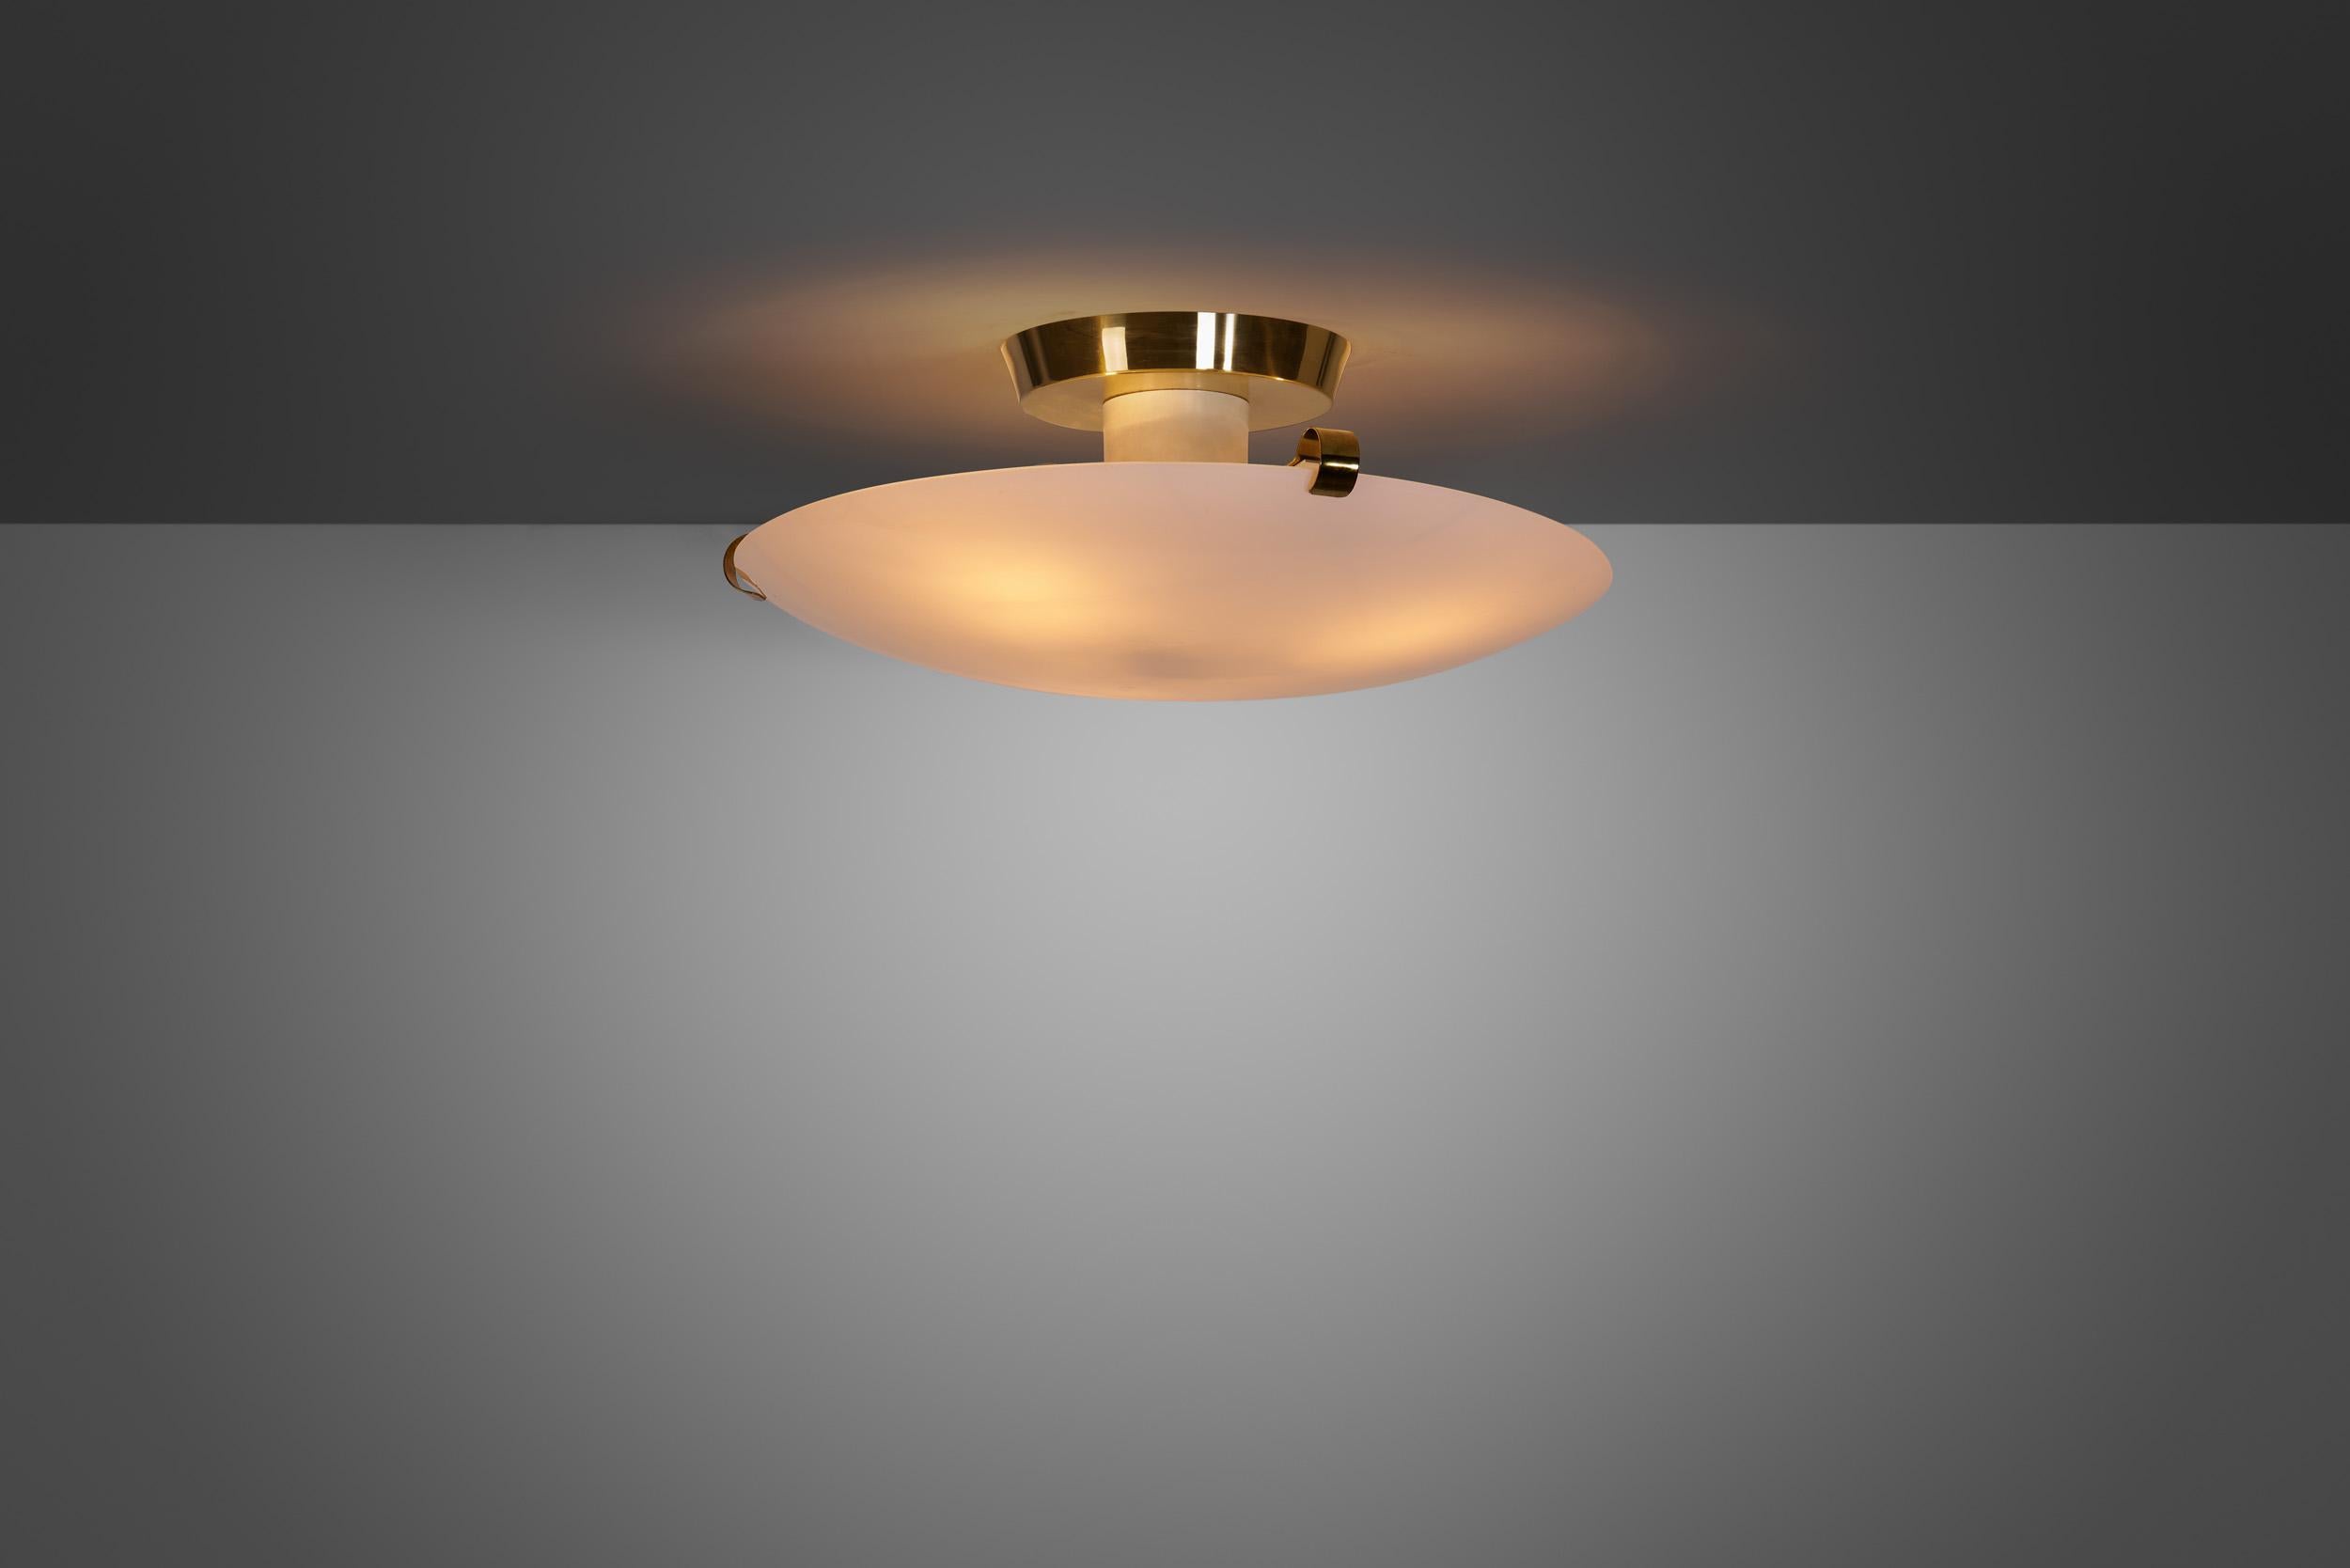 Finnish mid-century lighting design is world-famous for numerous reasons. The country’s designers managed to make strictly functional design look beautiful in addition to their practicality and high-quality. This Valinte Oy ceiling or plafond lamp